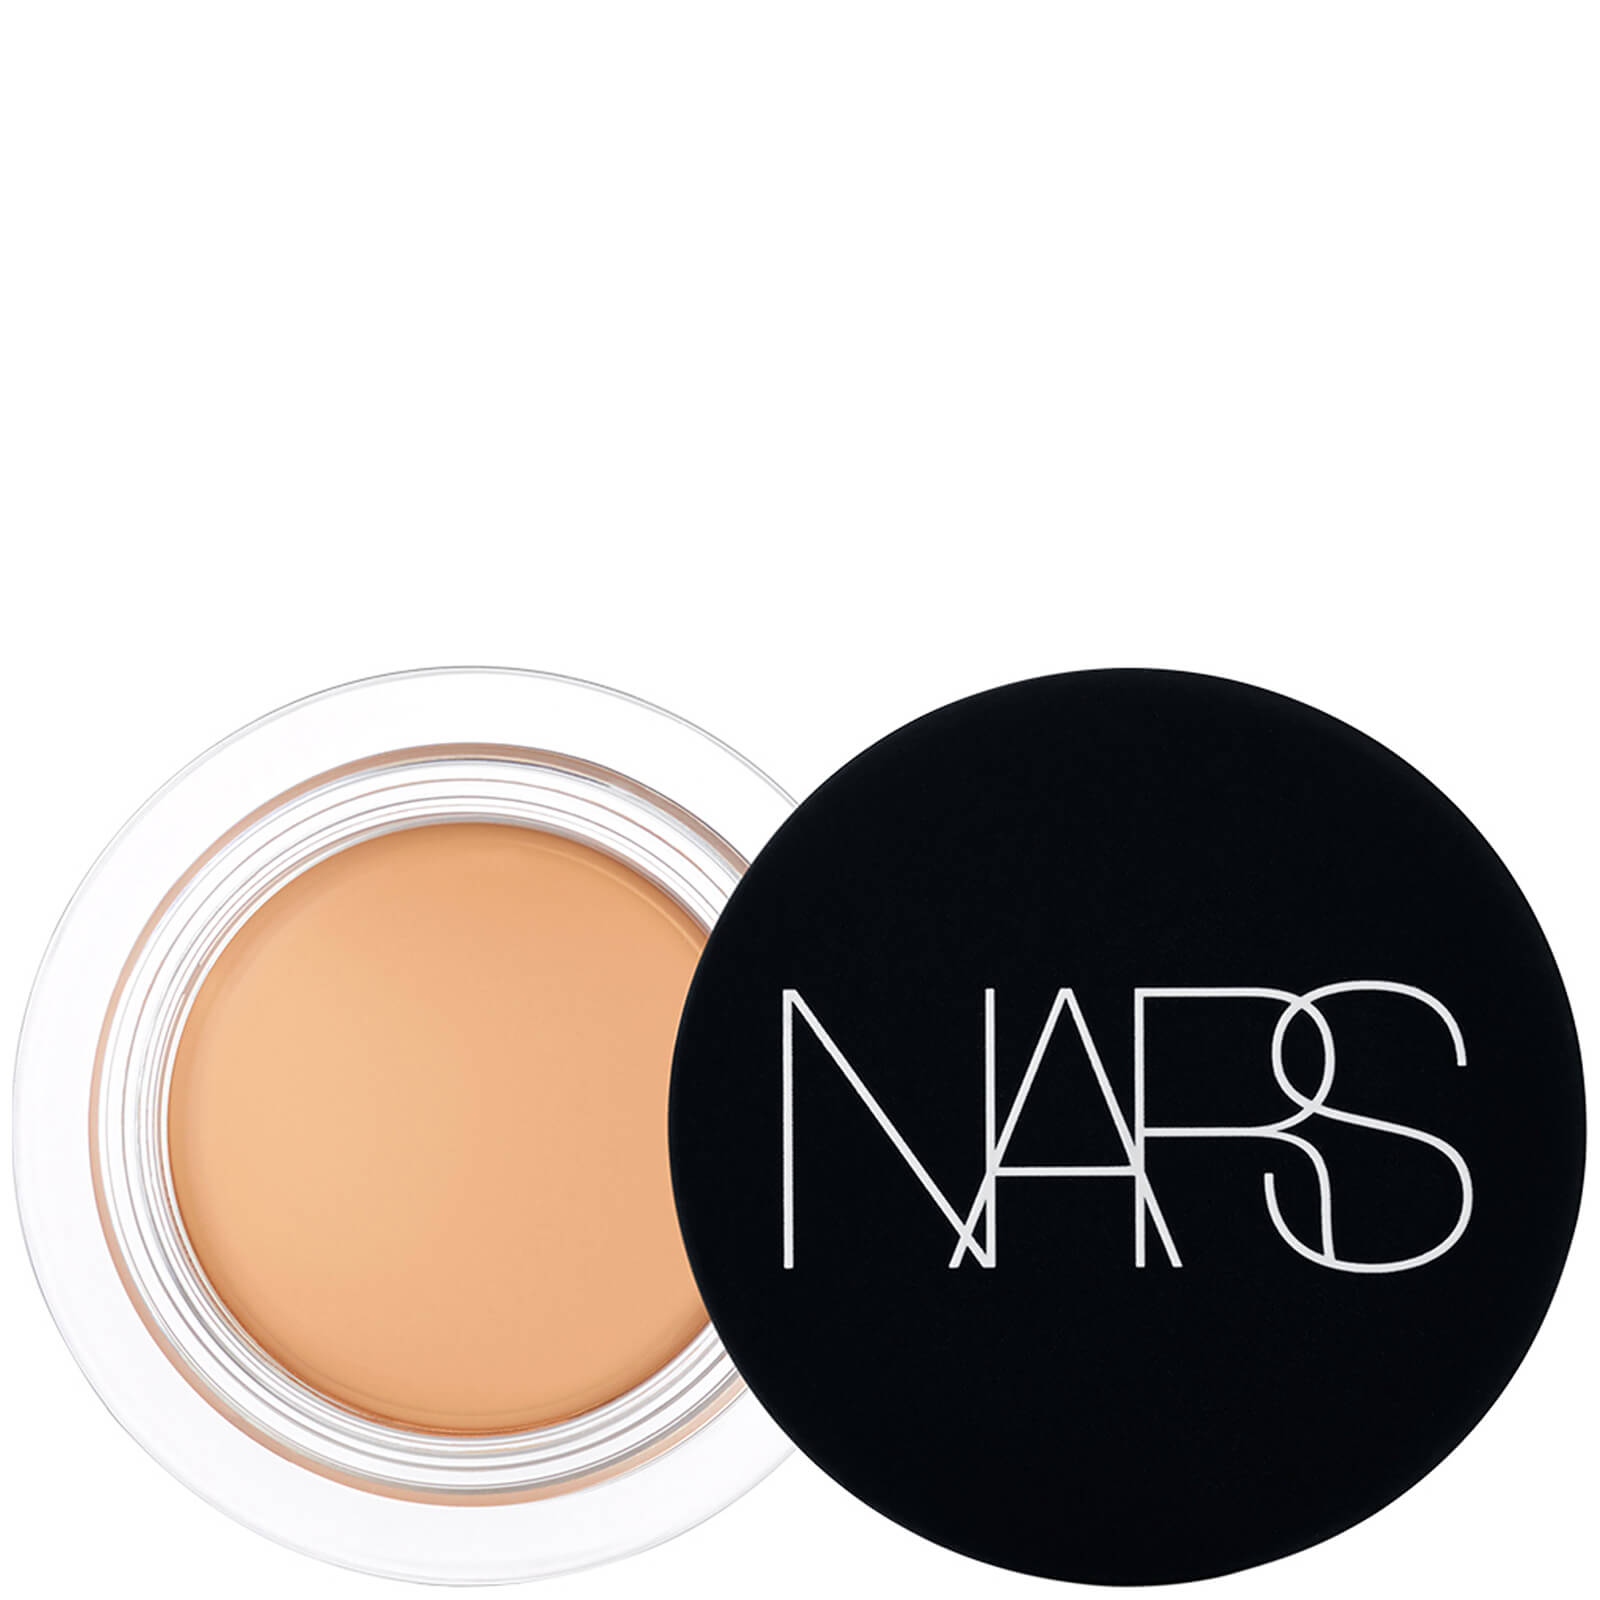 NARS Soft Matte Complete Concealer 6.2g (Various Shades) - Macadamia